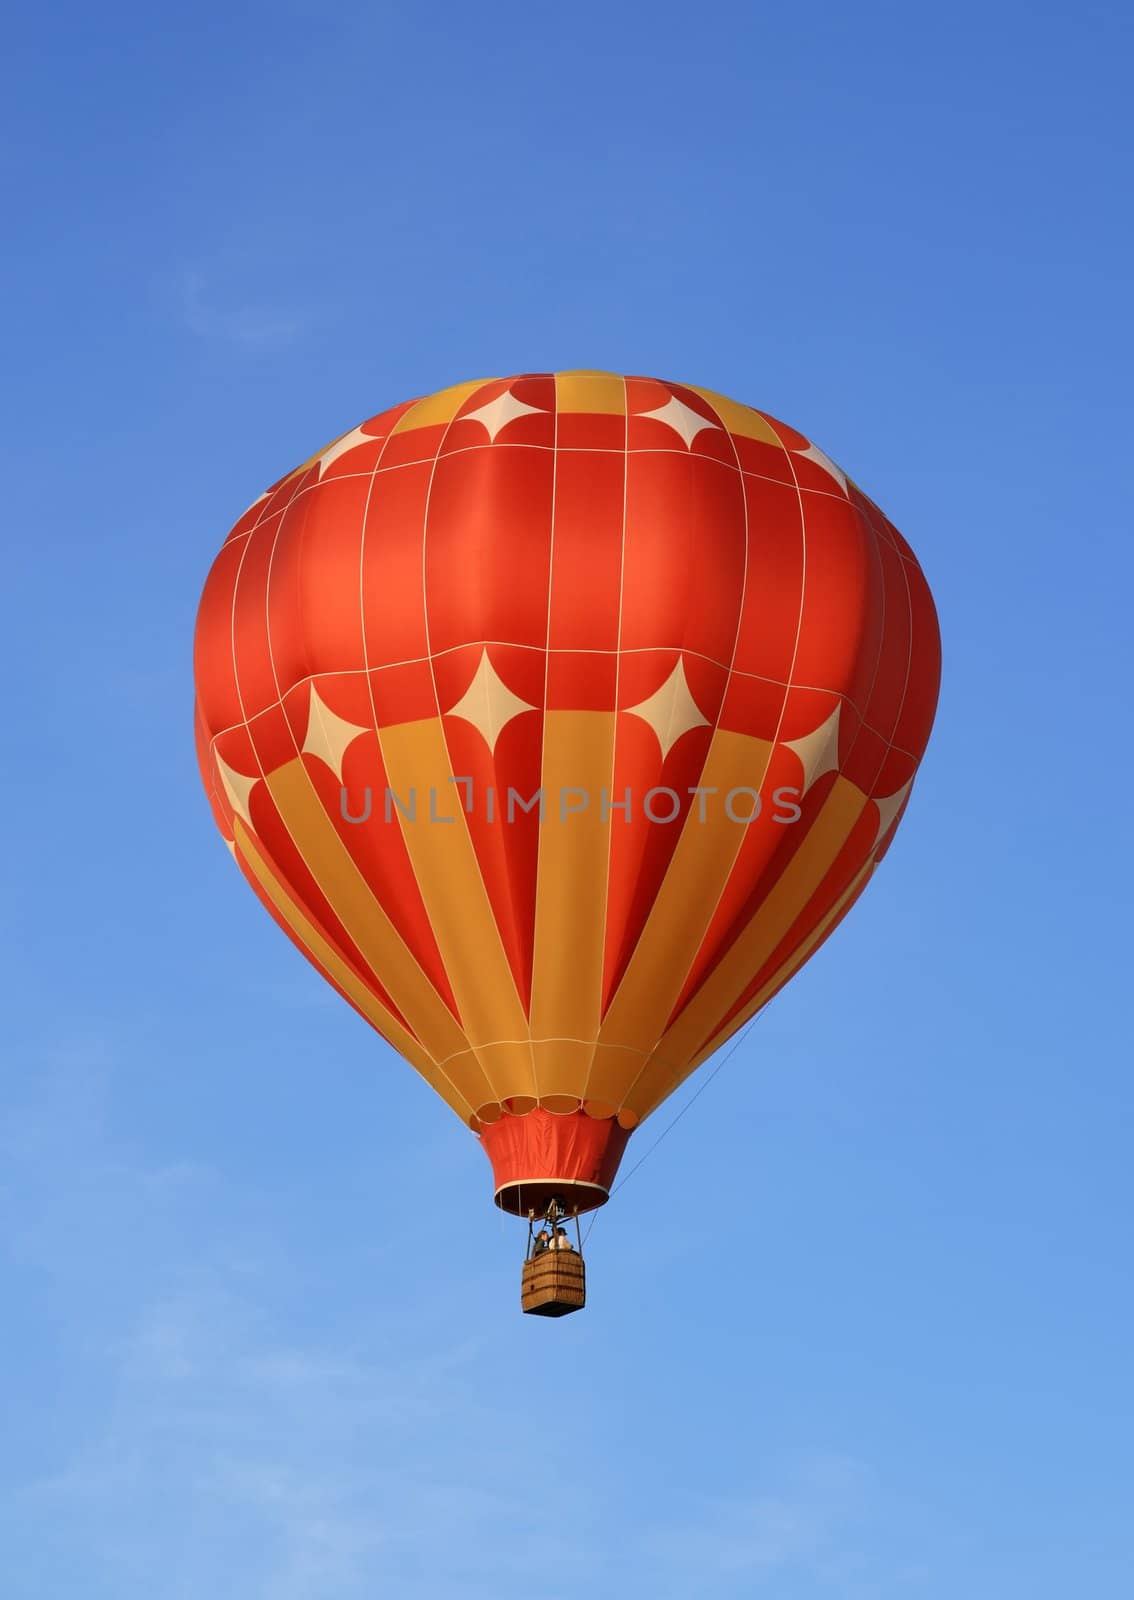 Red and orange hot air balloon in the blue sky.